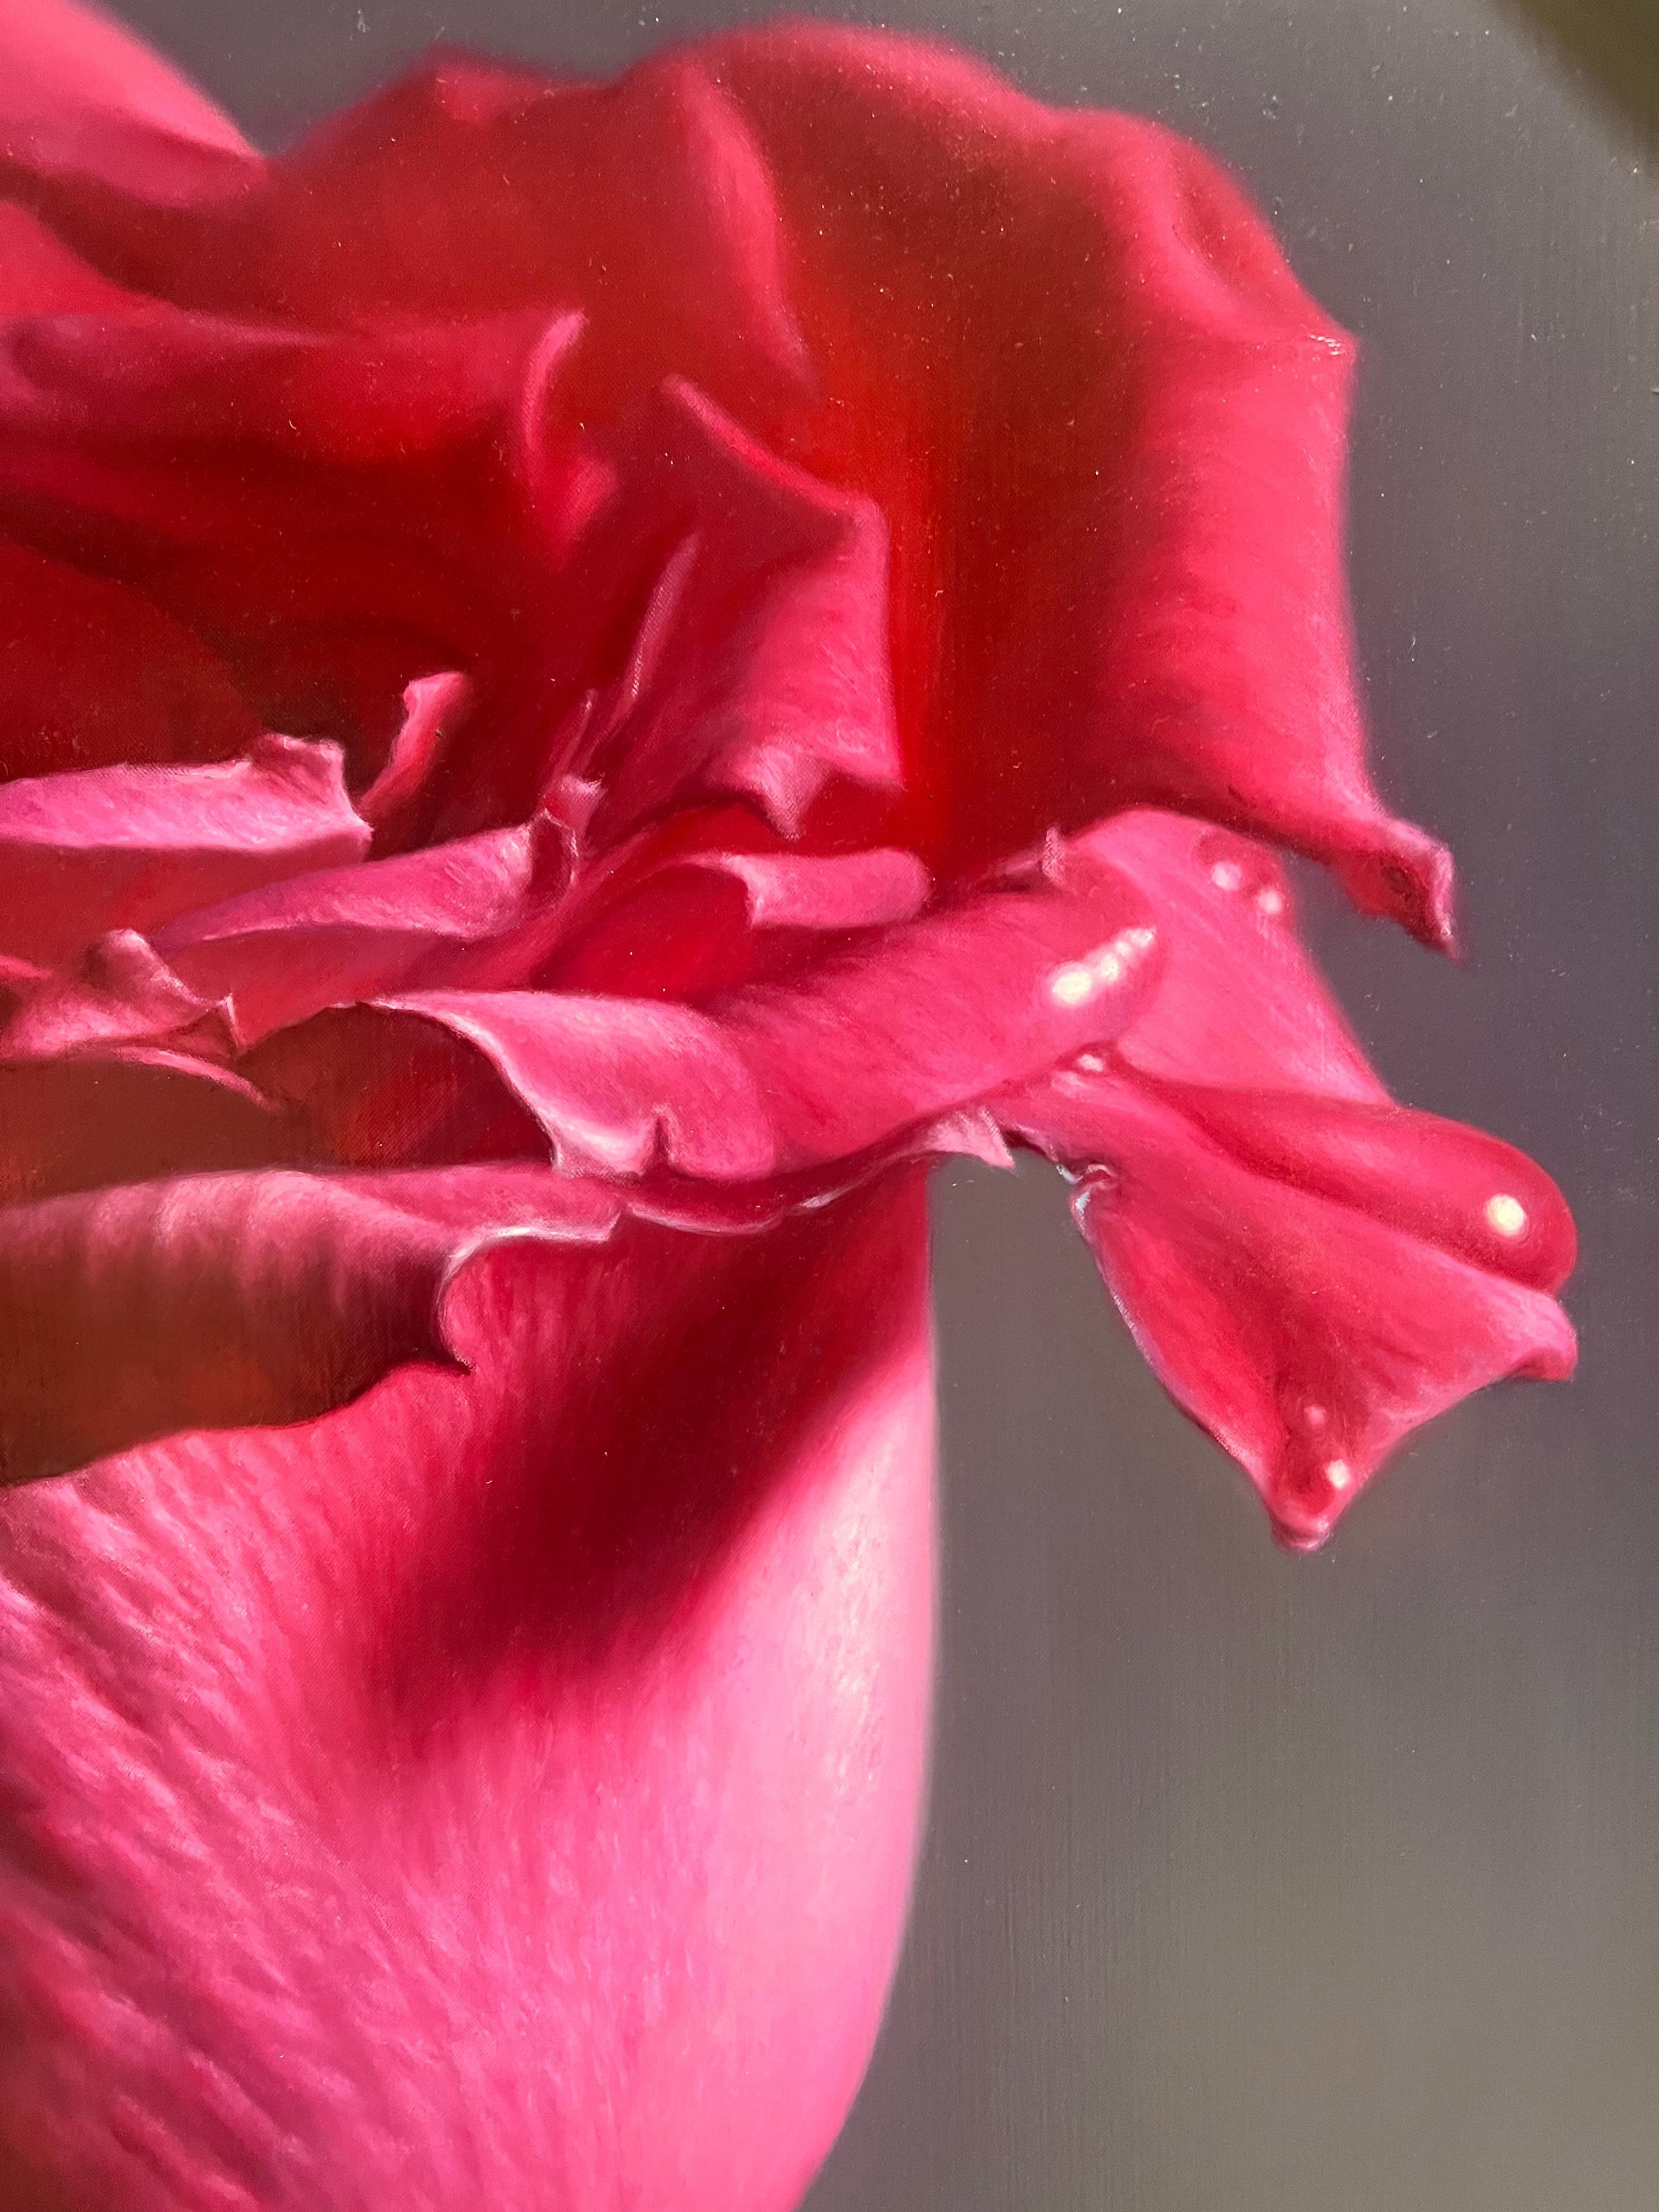 Red Red Rose - Photorealist Painting by Jose Borrell